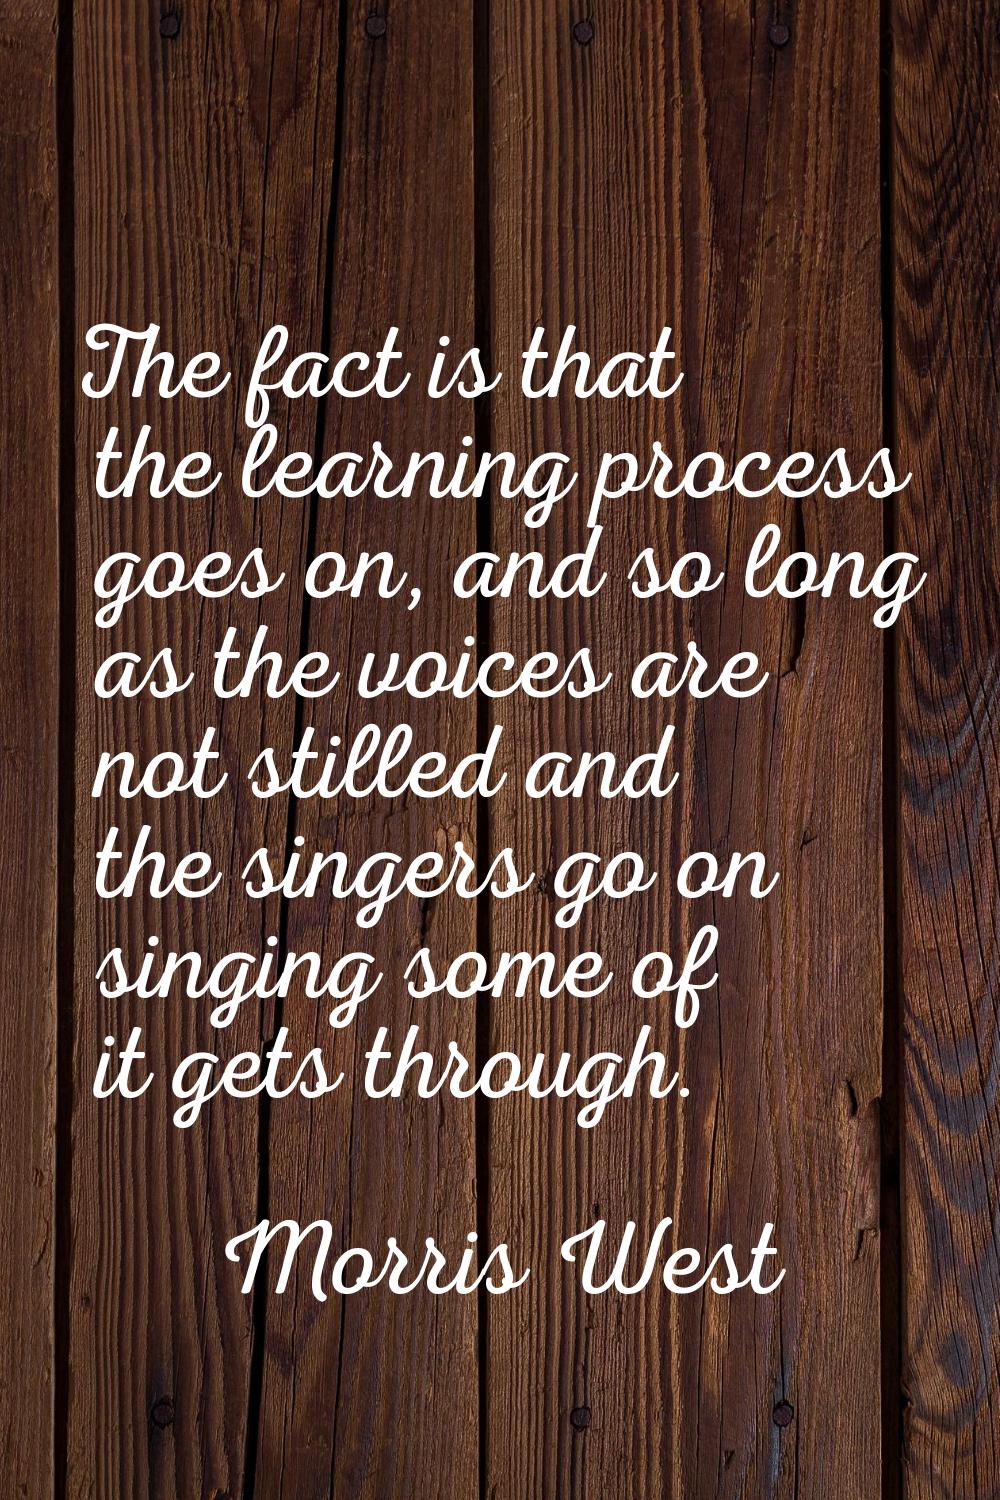 The fact is that the learning process goes on, and so long as the voices are not stilled and the si